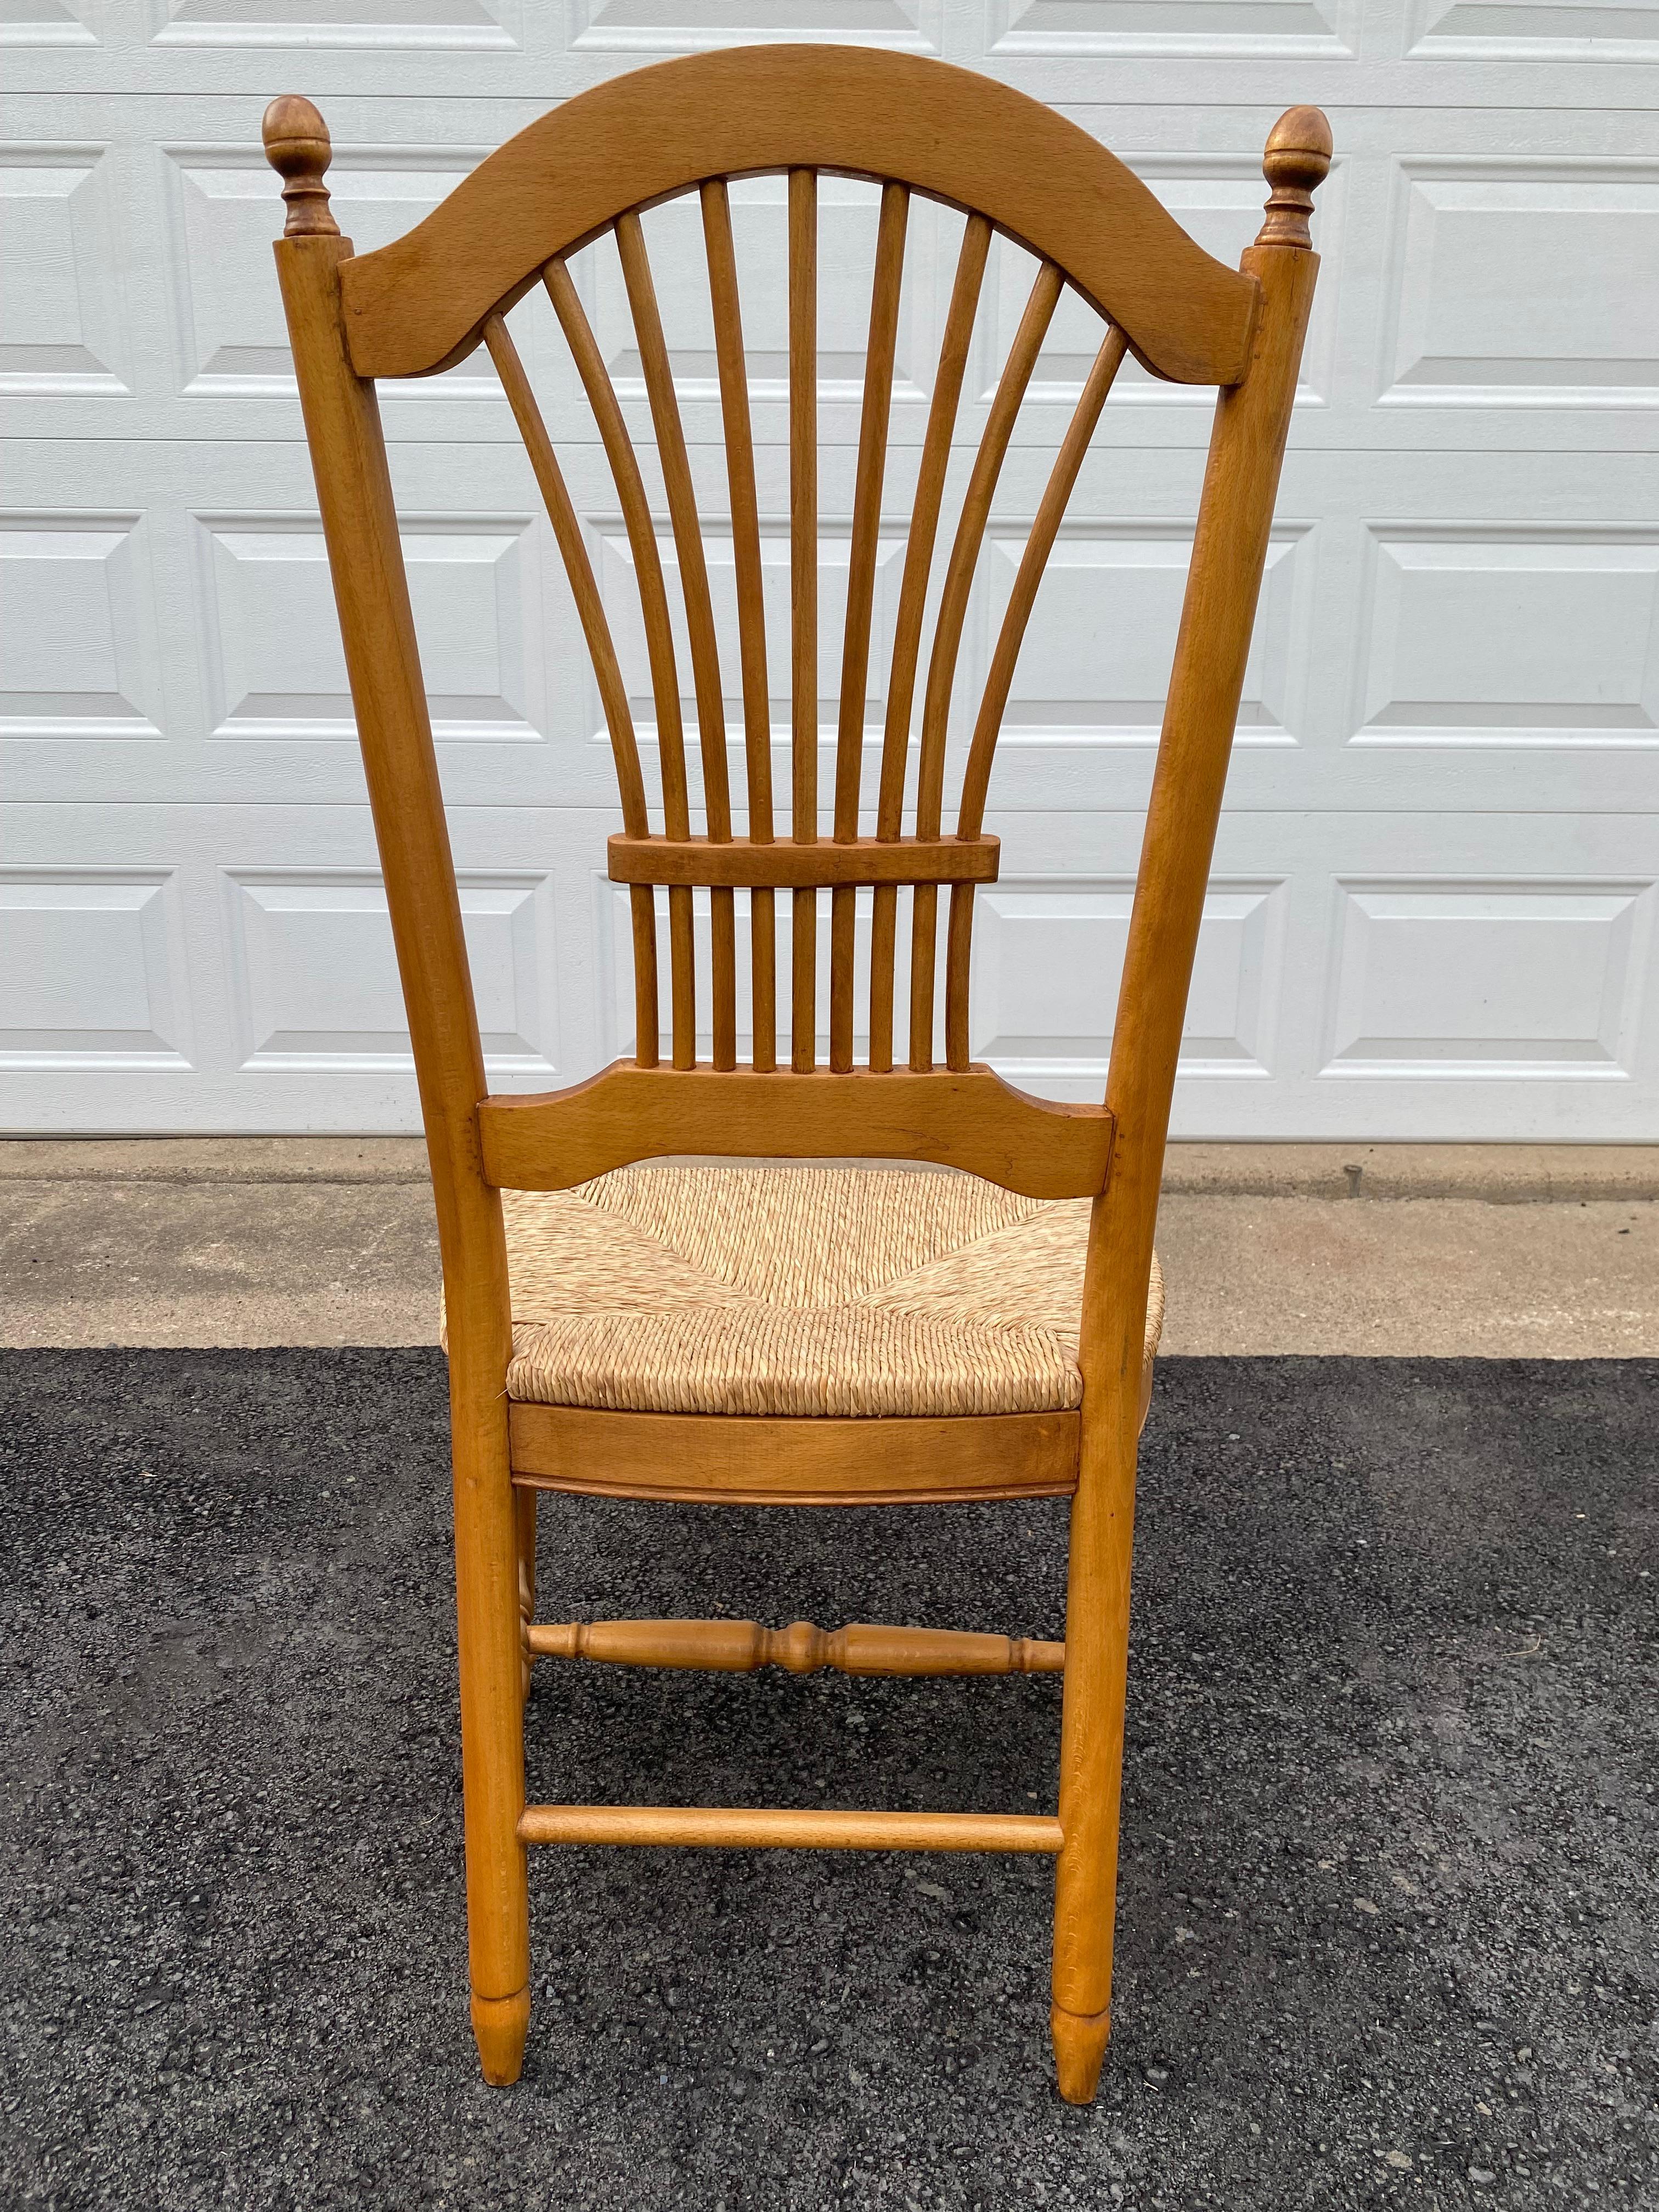 ethan allen wheat back chairs